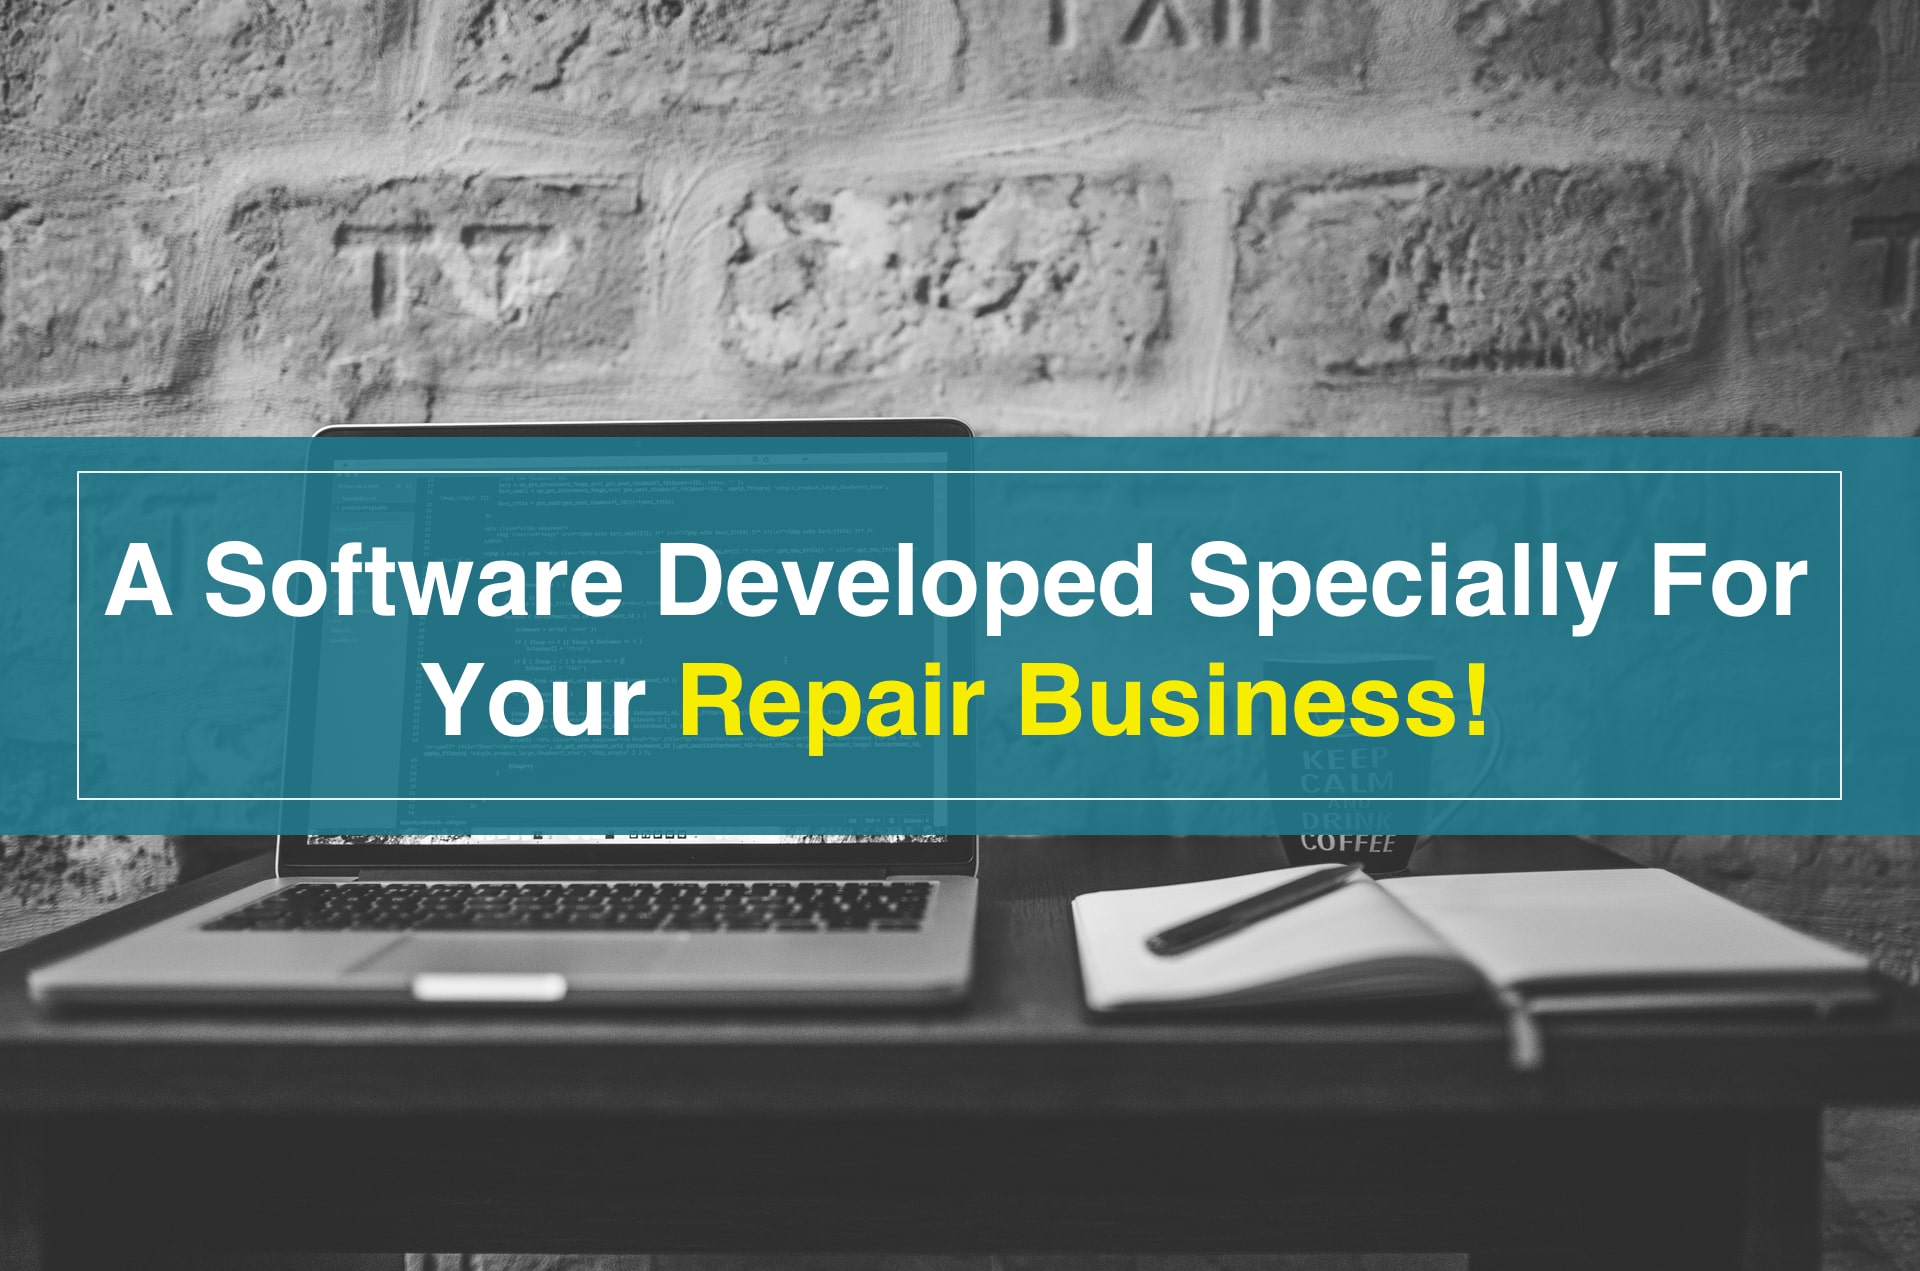 The best management software for repair businesses